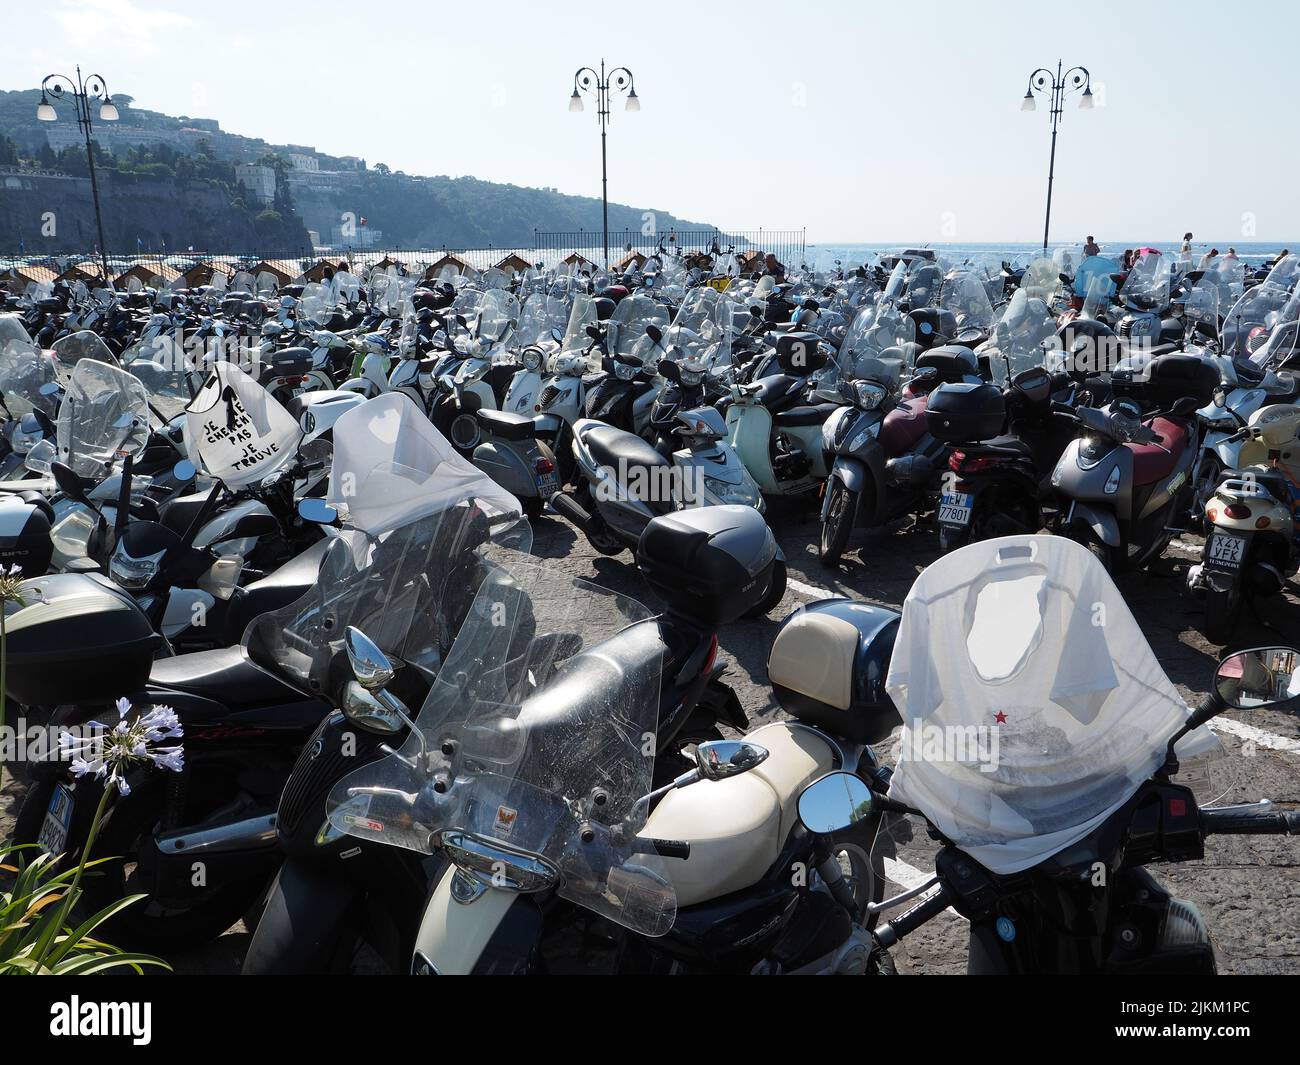 Scooters are very popular in Italy, this is a scooter parking lot in Sorrento, Campania, Italy Stock Photo